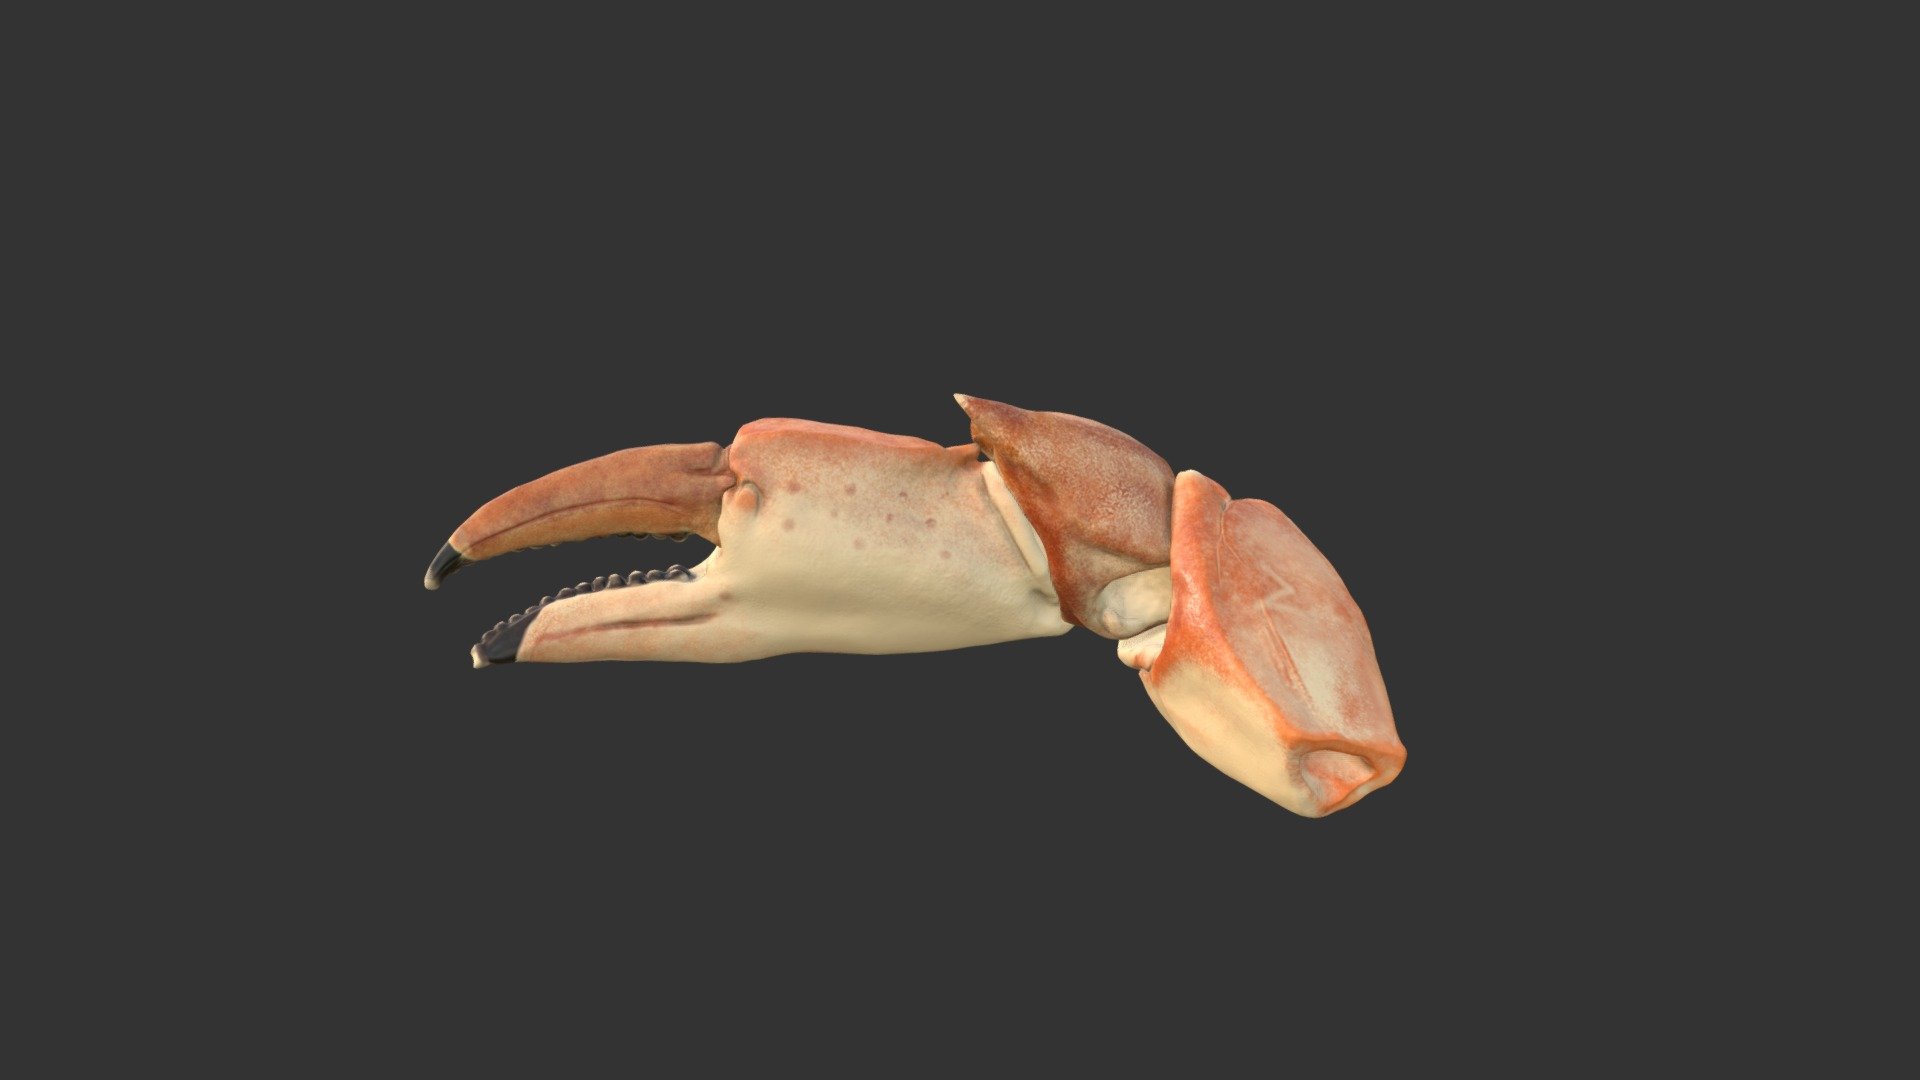 Personal work where I tried to capture a crab claw that I found on a beach - Crab Claw - 3D model by Kliefer 3d model